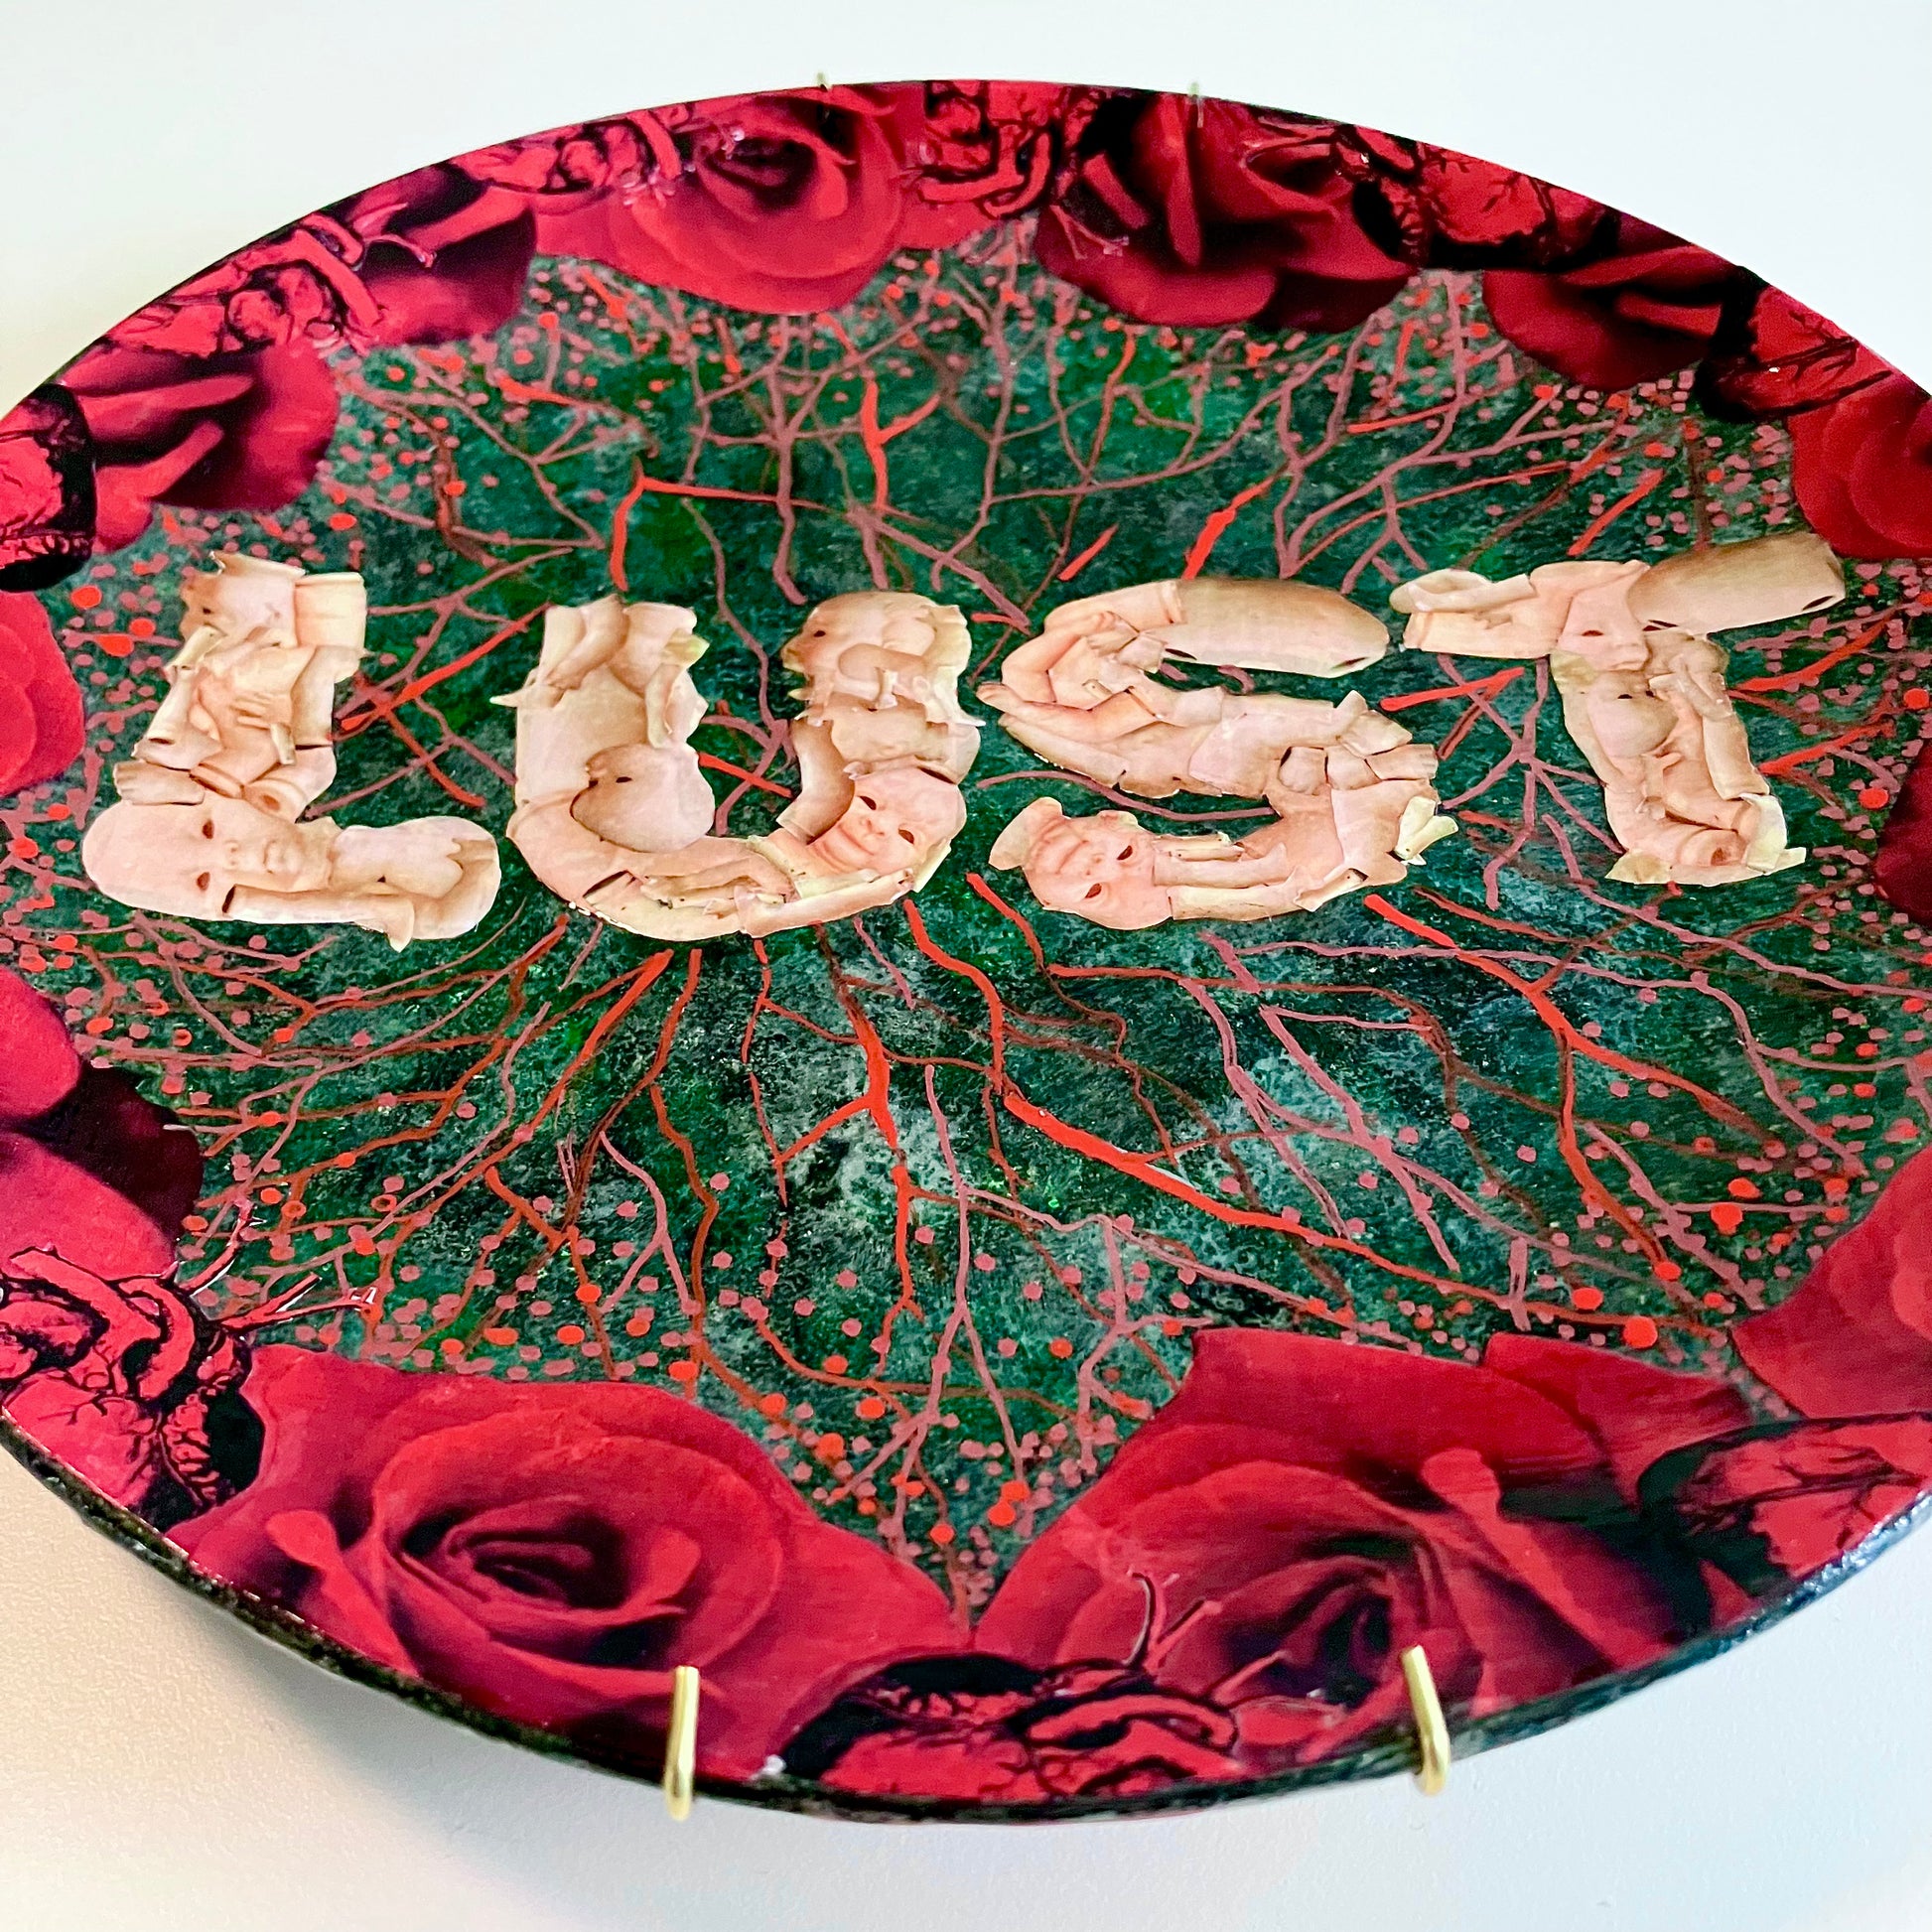 "Lust" Wall Plate by House of Frisson, featuring the word "lust" written with plastic doll parts, framed by red roses and anatomical human heart ,on a charcoal grey background with vein patterns. Closeup details.